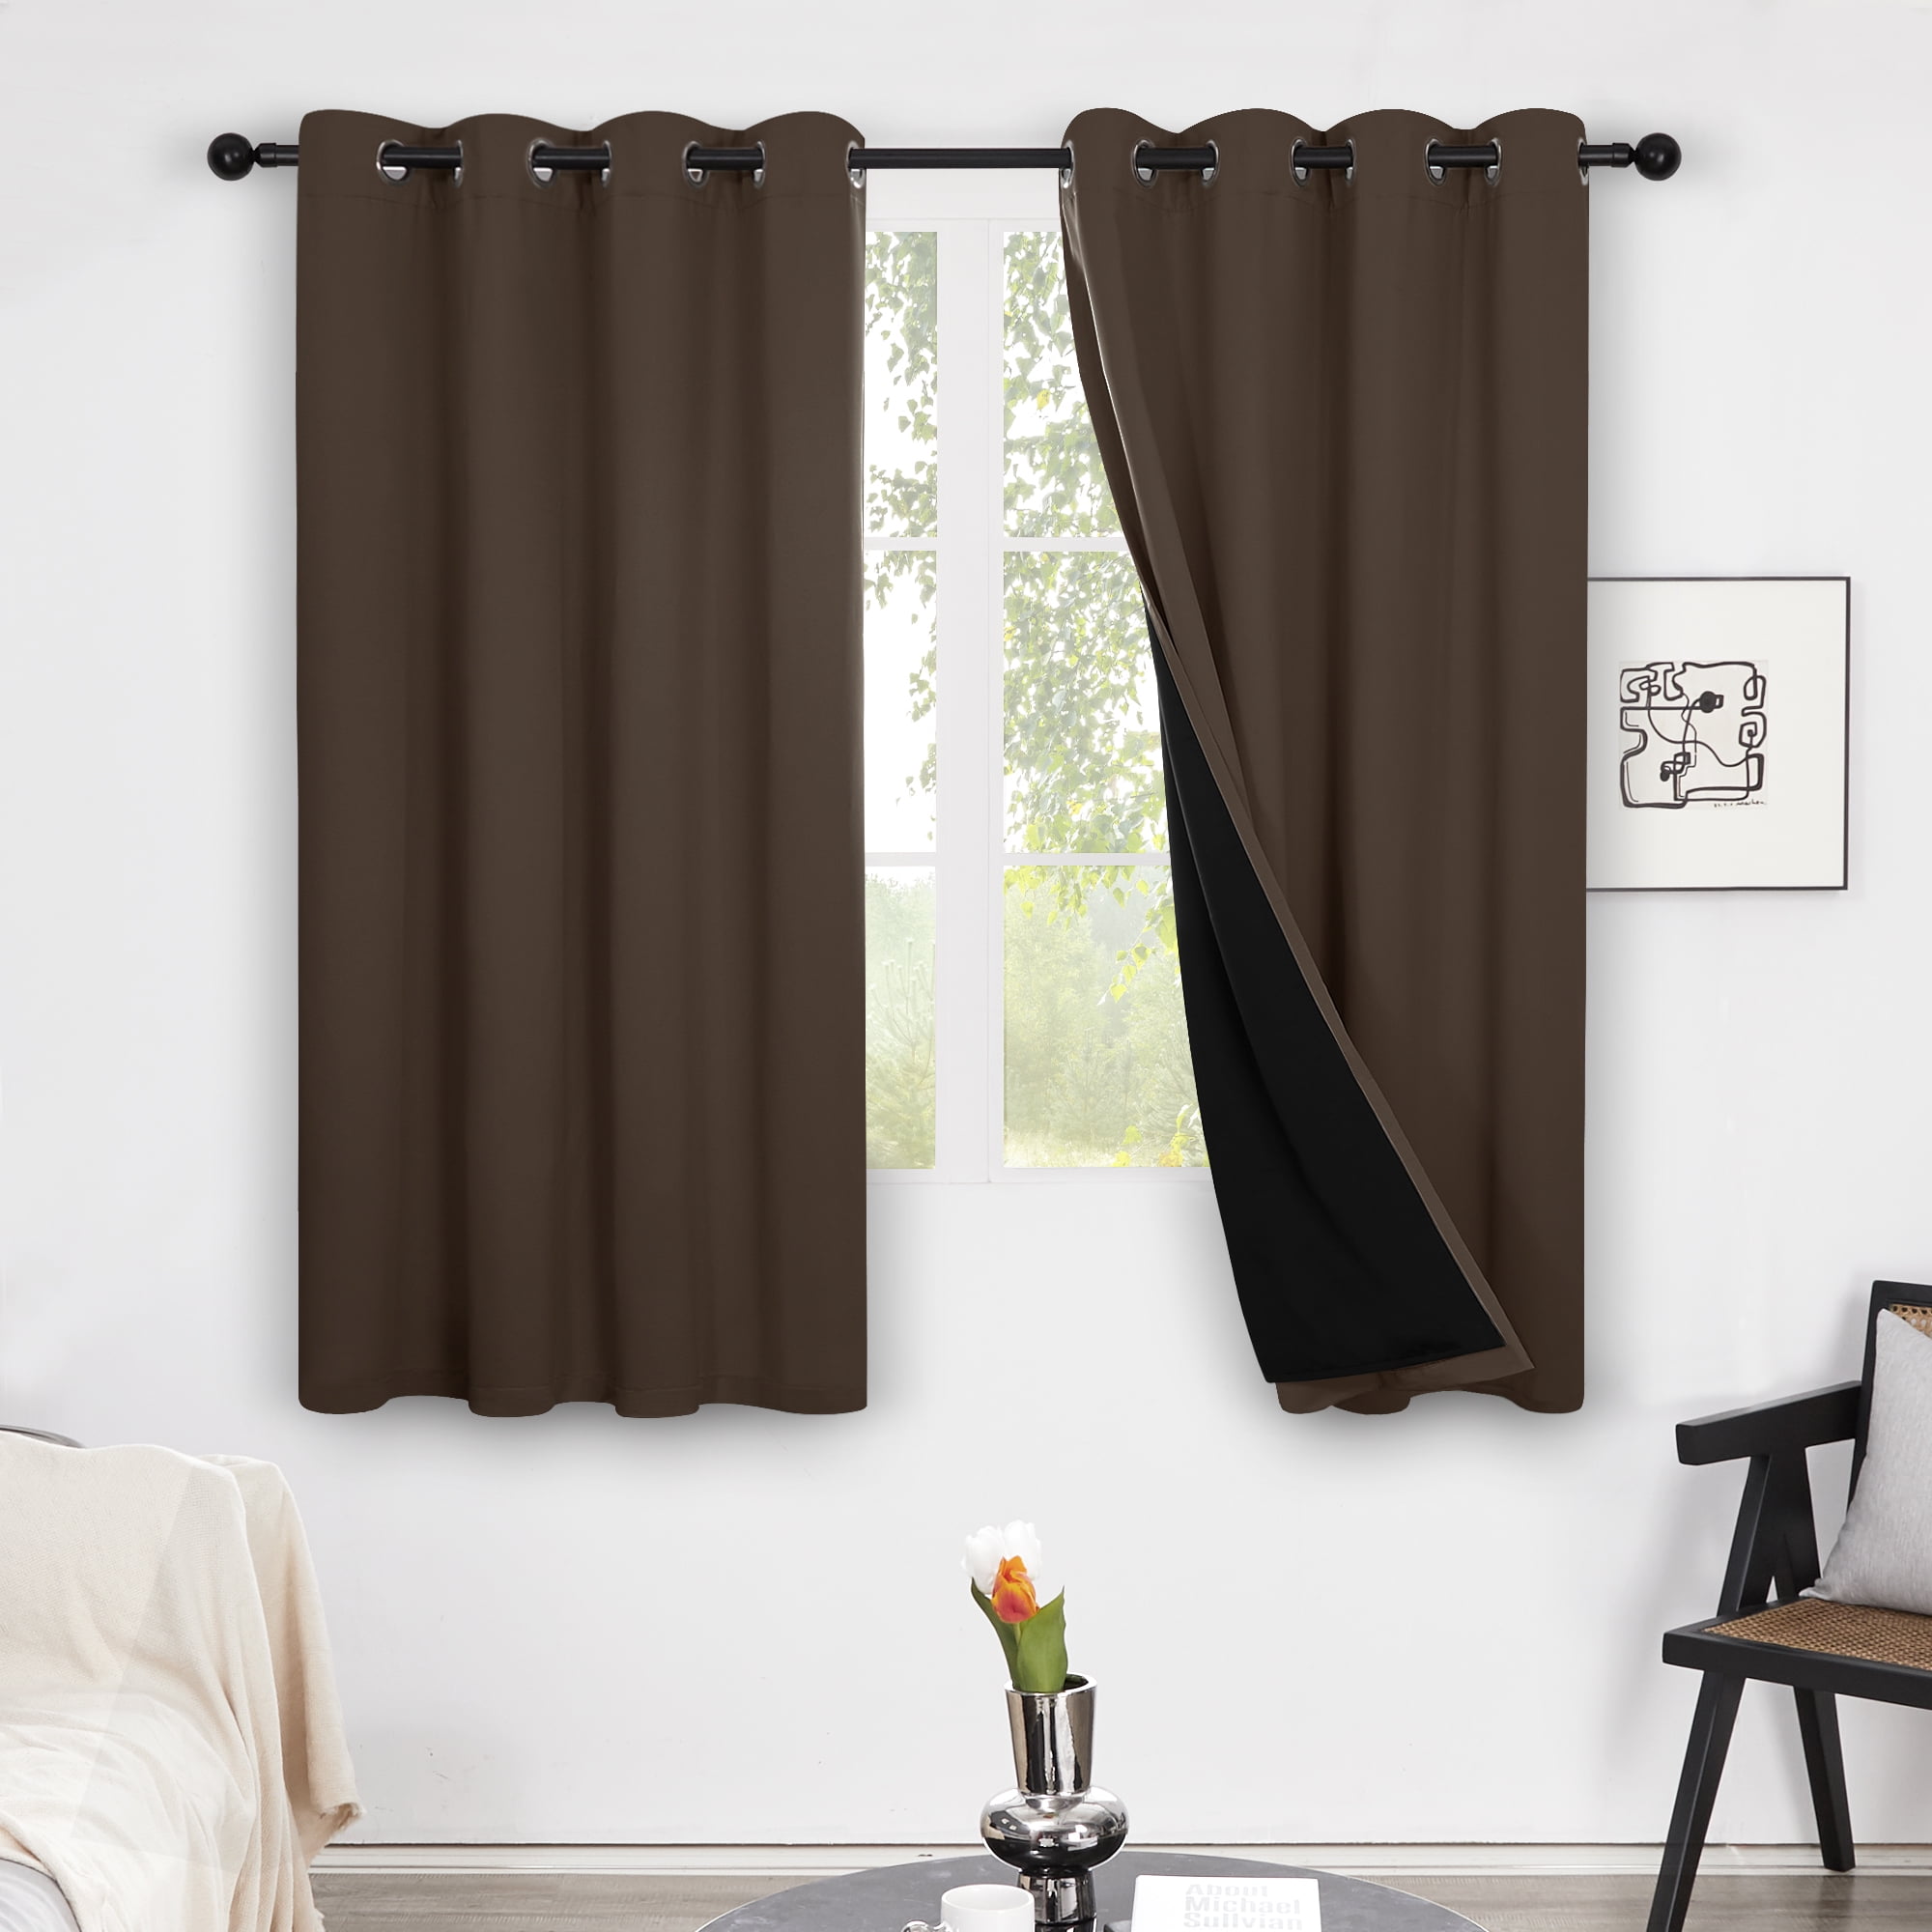 Deconovo 100% Blackout Curtains Gray Double Layers Total Full Dark Blocking  Sun Light Thermal Insulated for the Bedroom, 2 Panels, 52x54 in, Light Gray  